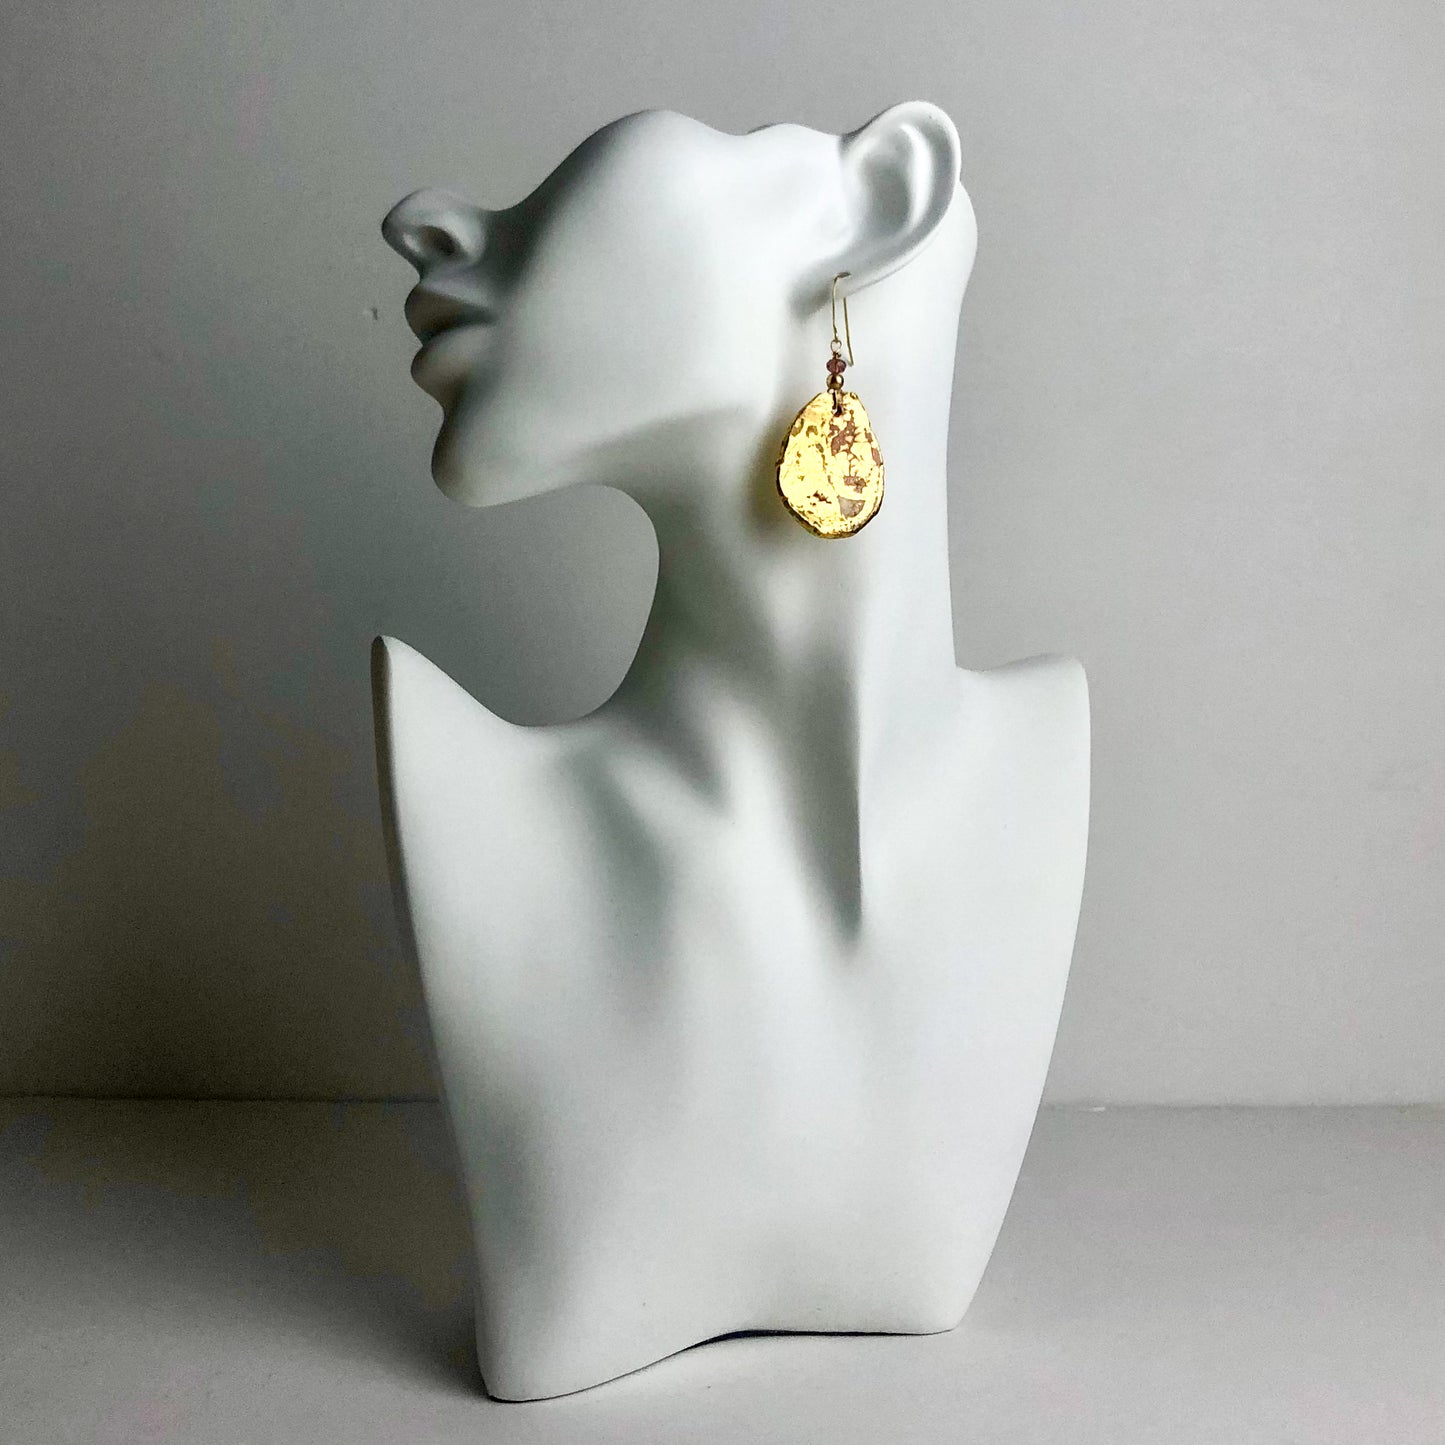 Jerusalem Drop Earring with Crystal and Gold Bead